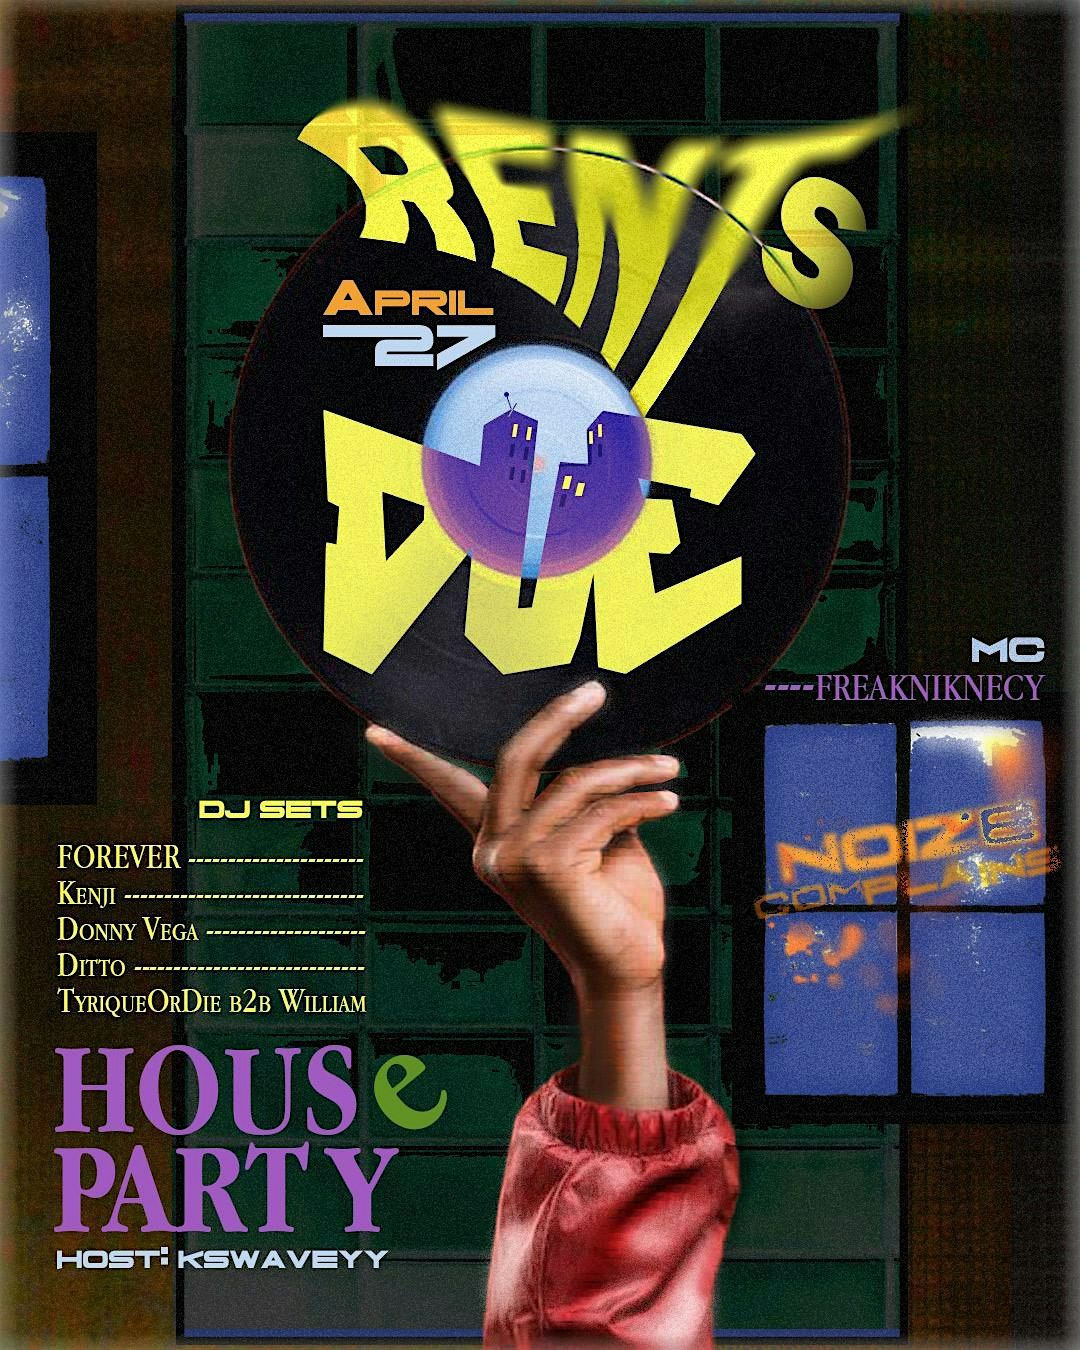 RENT'S DUE: HOUSE PARTY